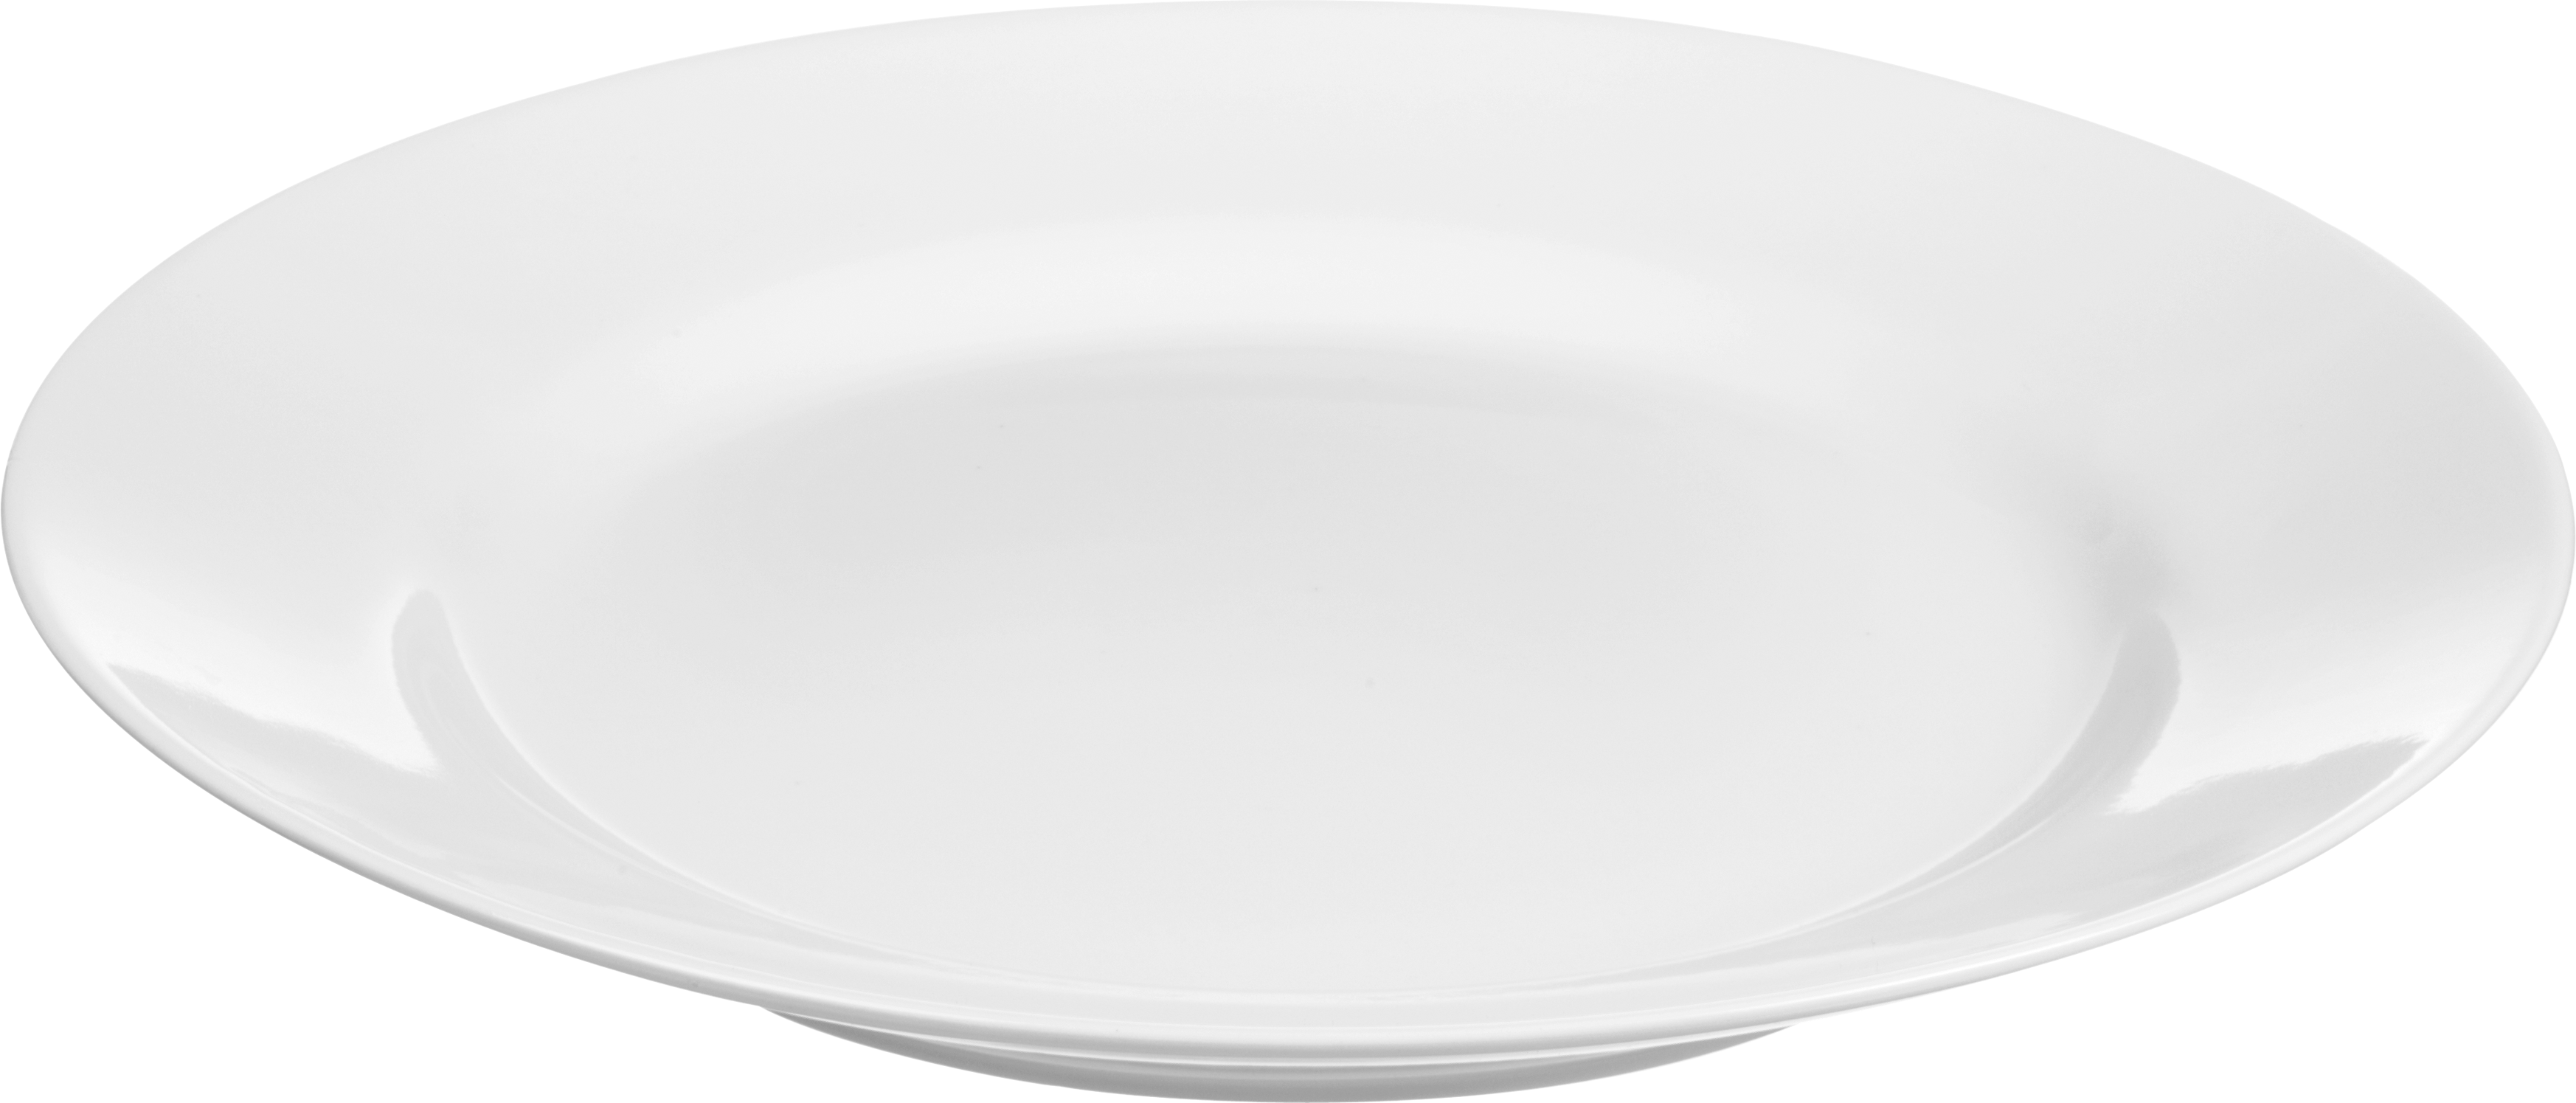 Plates Png Clipart PNG Image